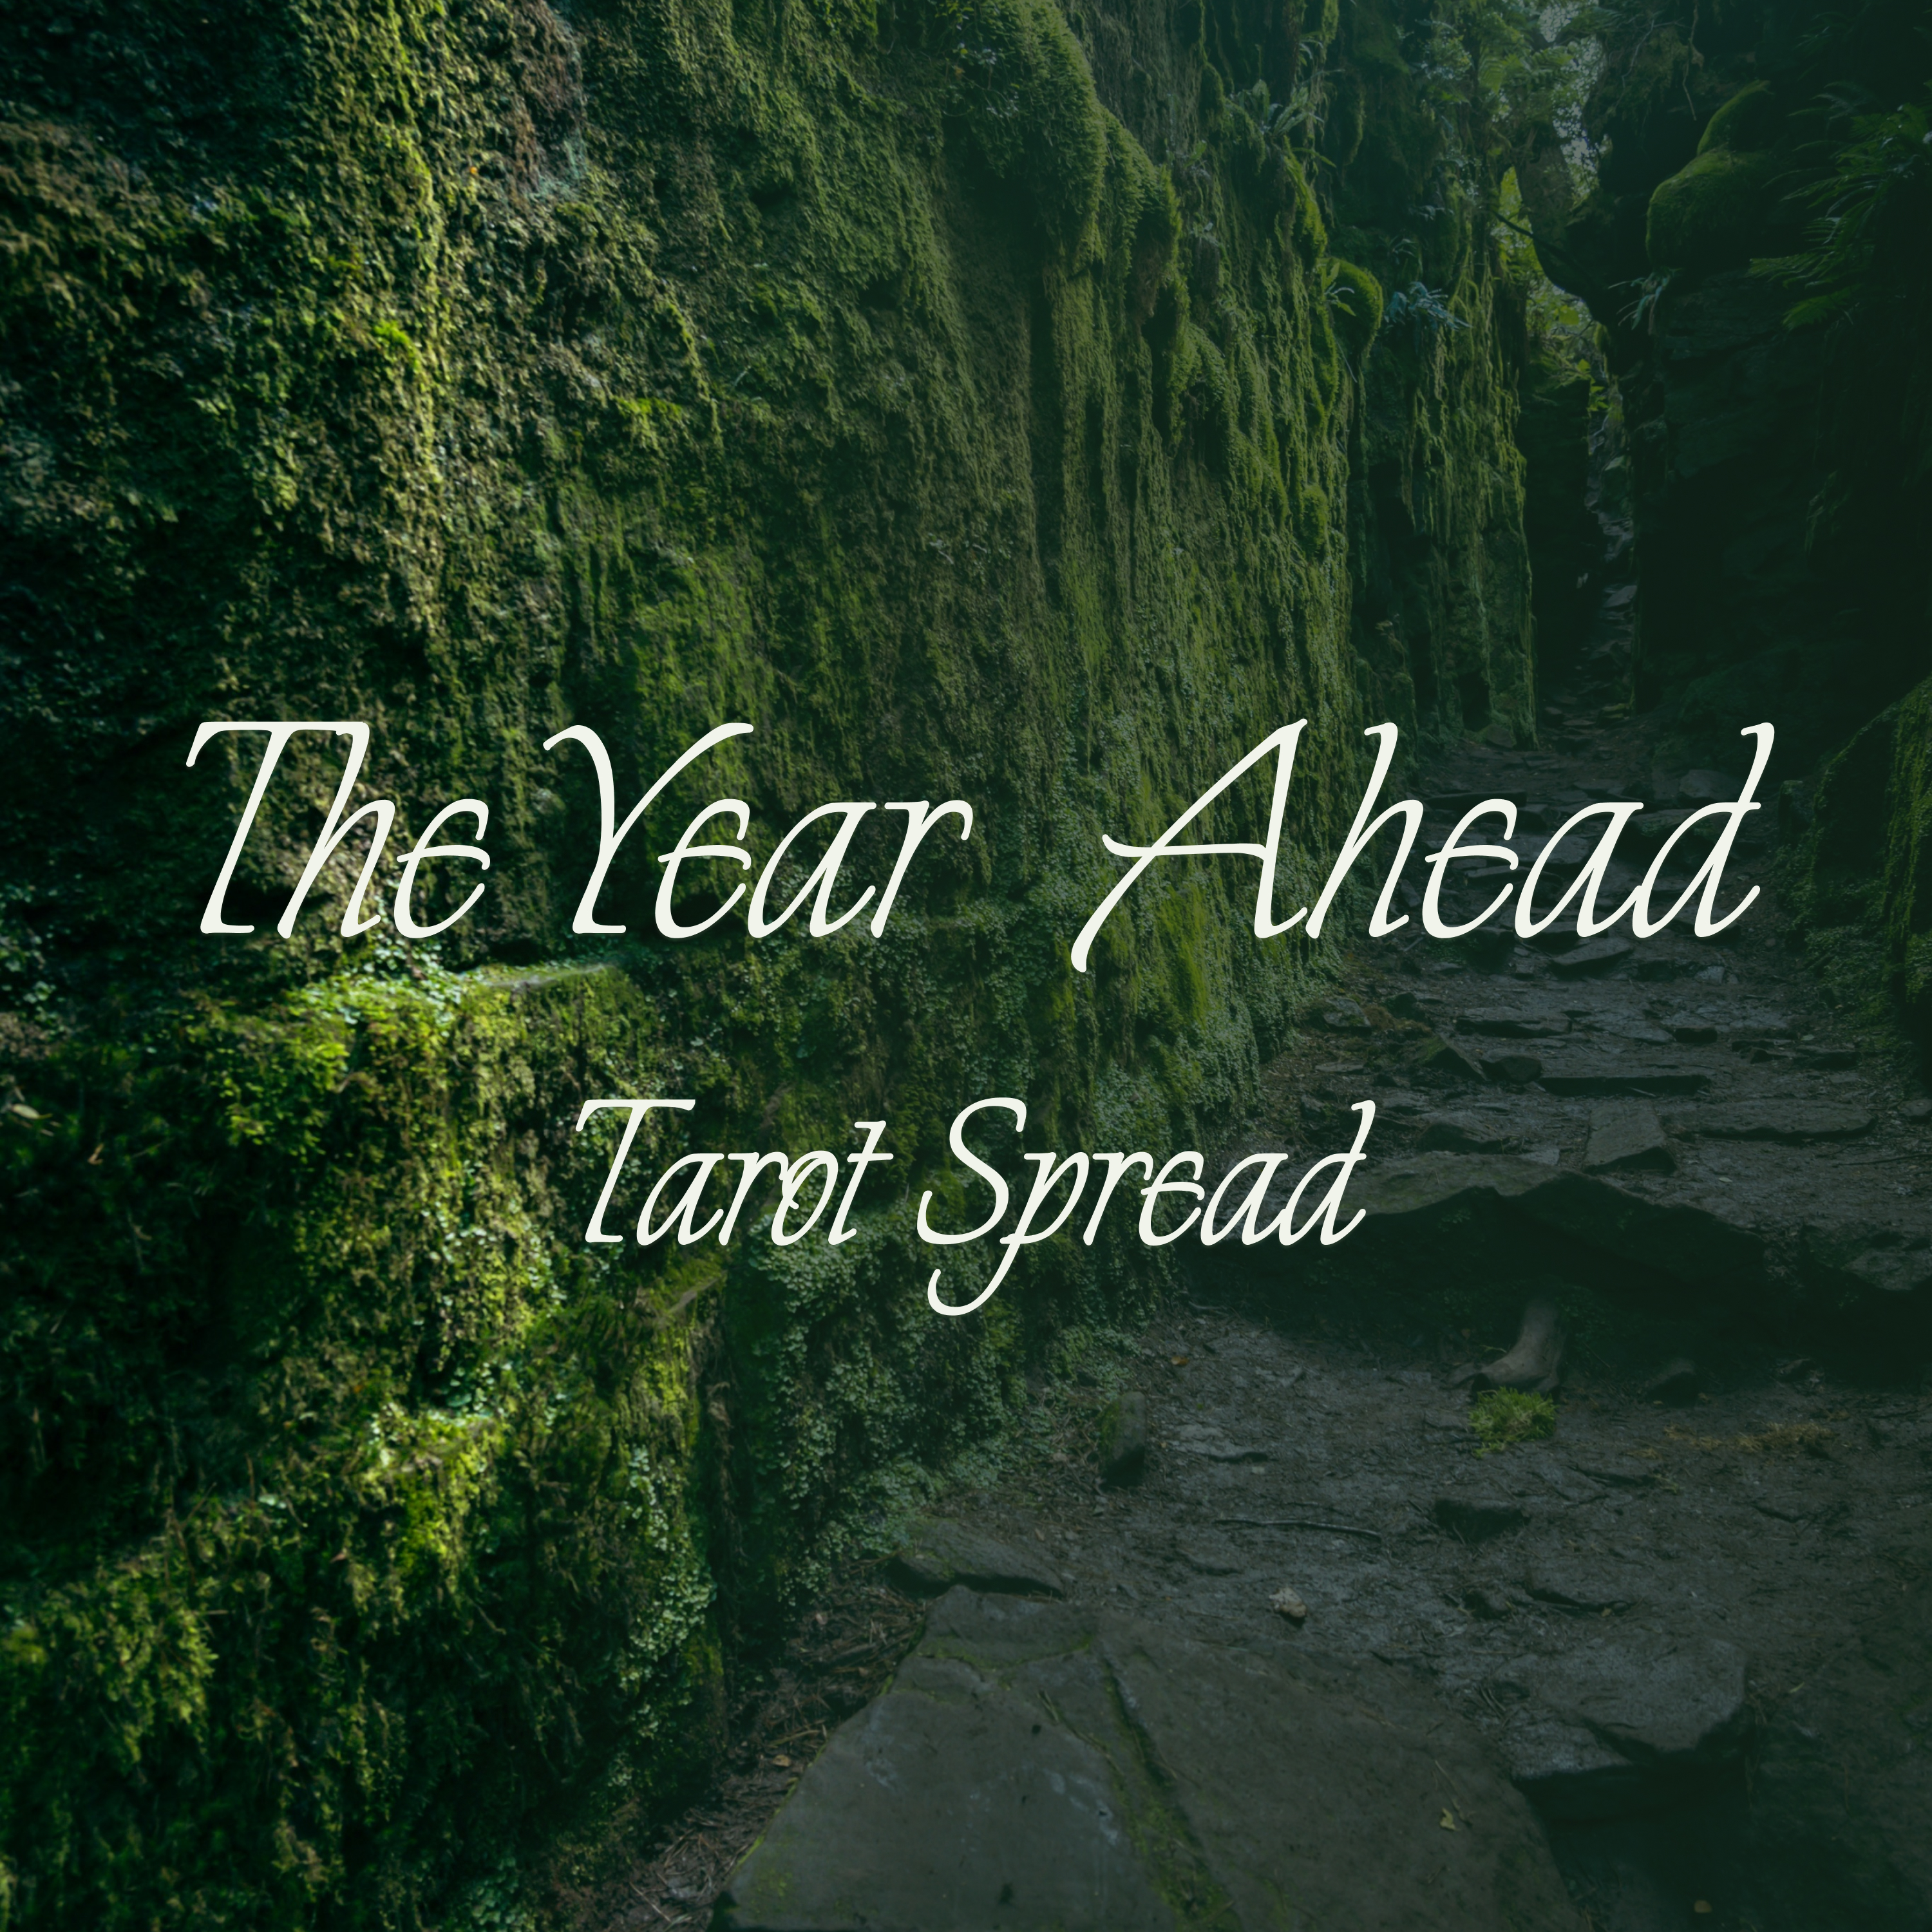 Year Ahead Tarot Spread - Discover Your Path for the New Year